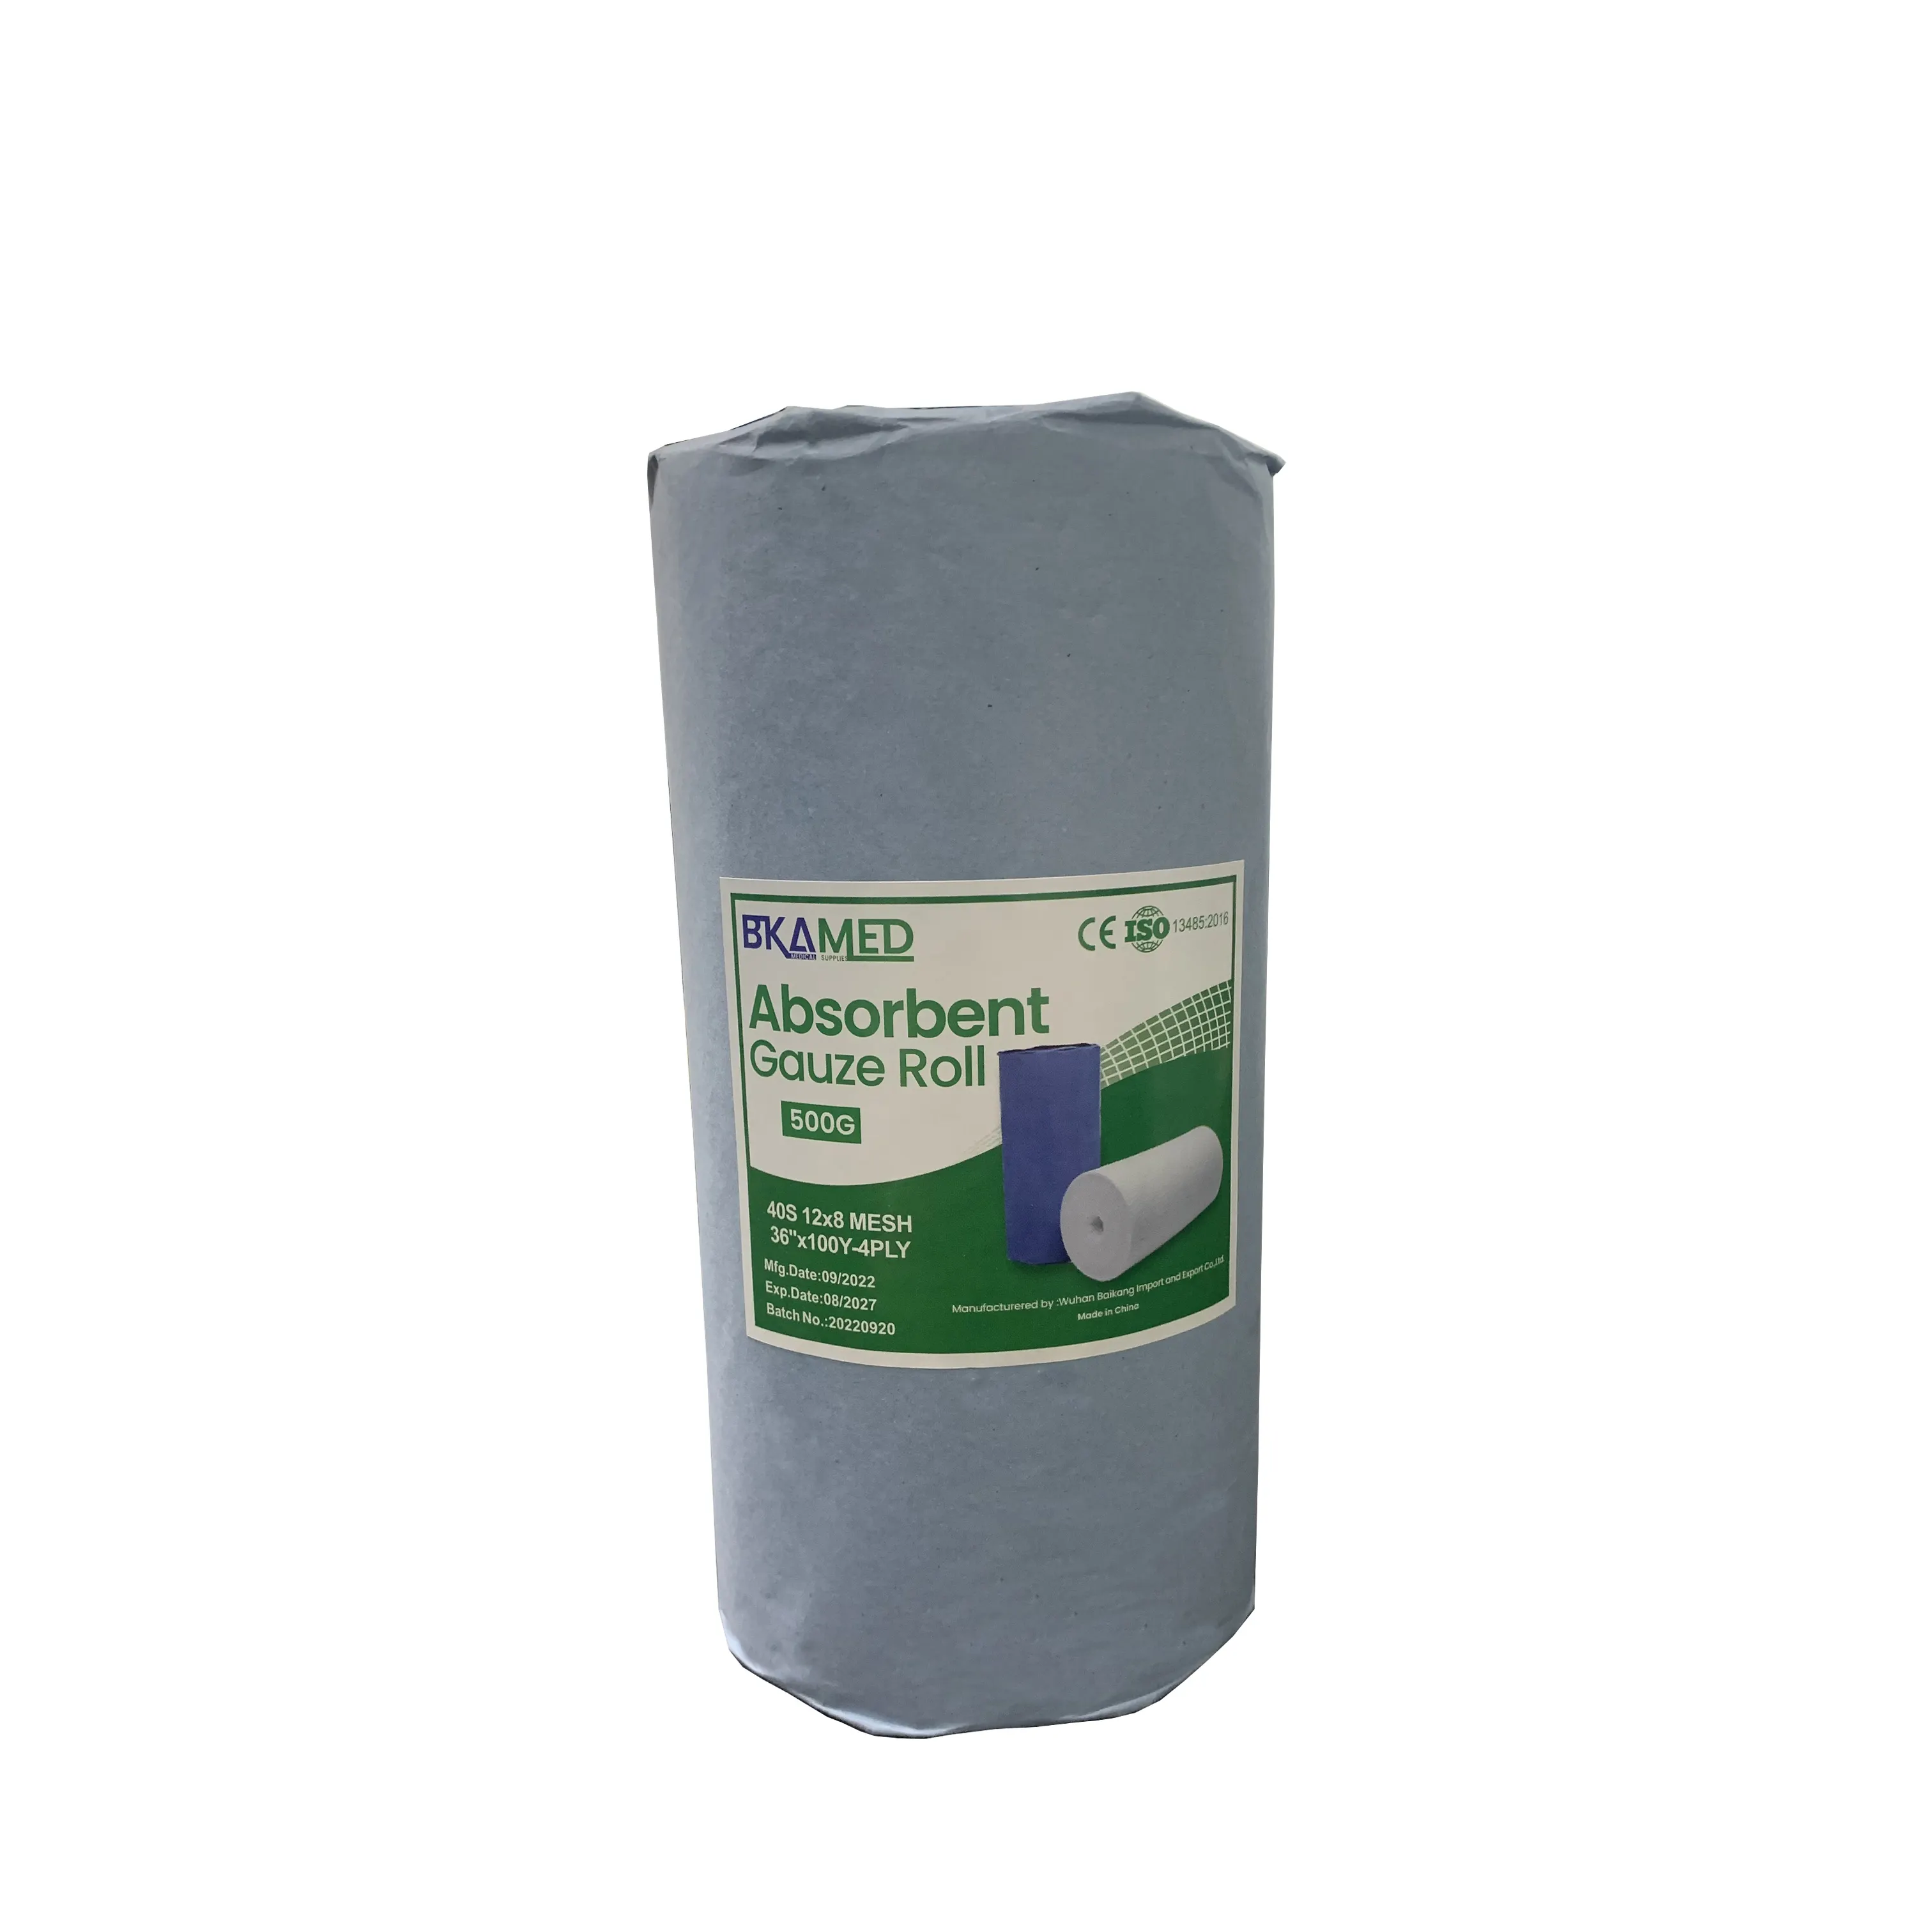 Absorbent cotton gauze bandage roll medical bleached hydrophilic gauze roll 100 yard 100m 90cmx5m 90x100 4ply 1500g